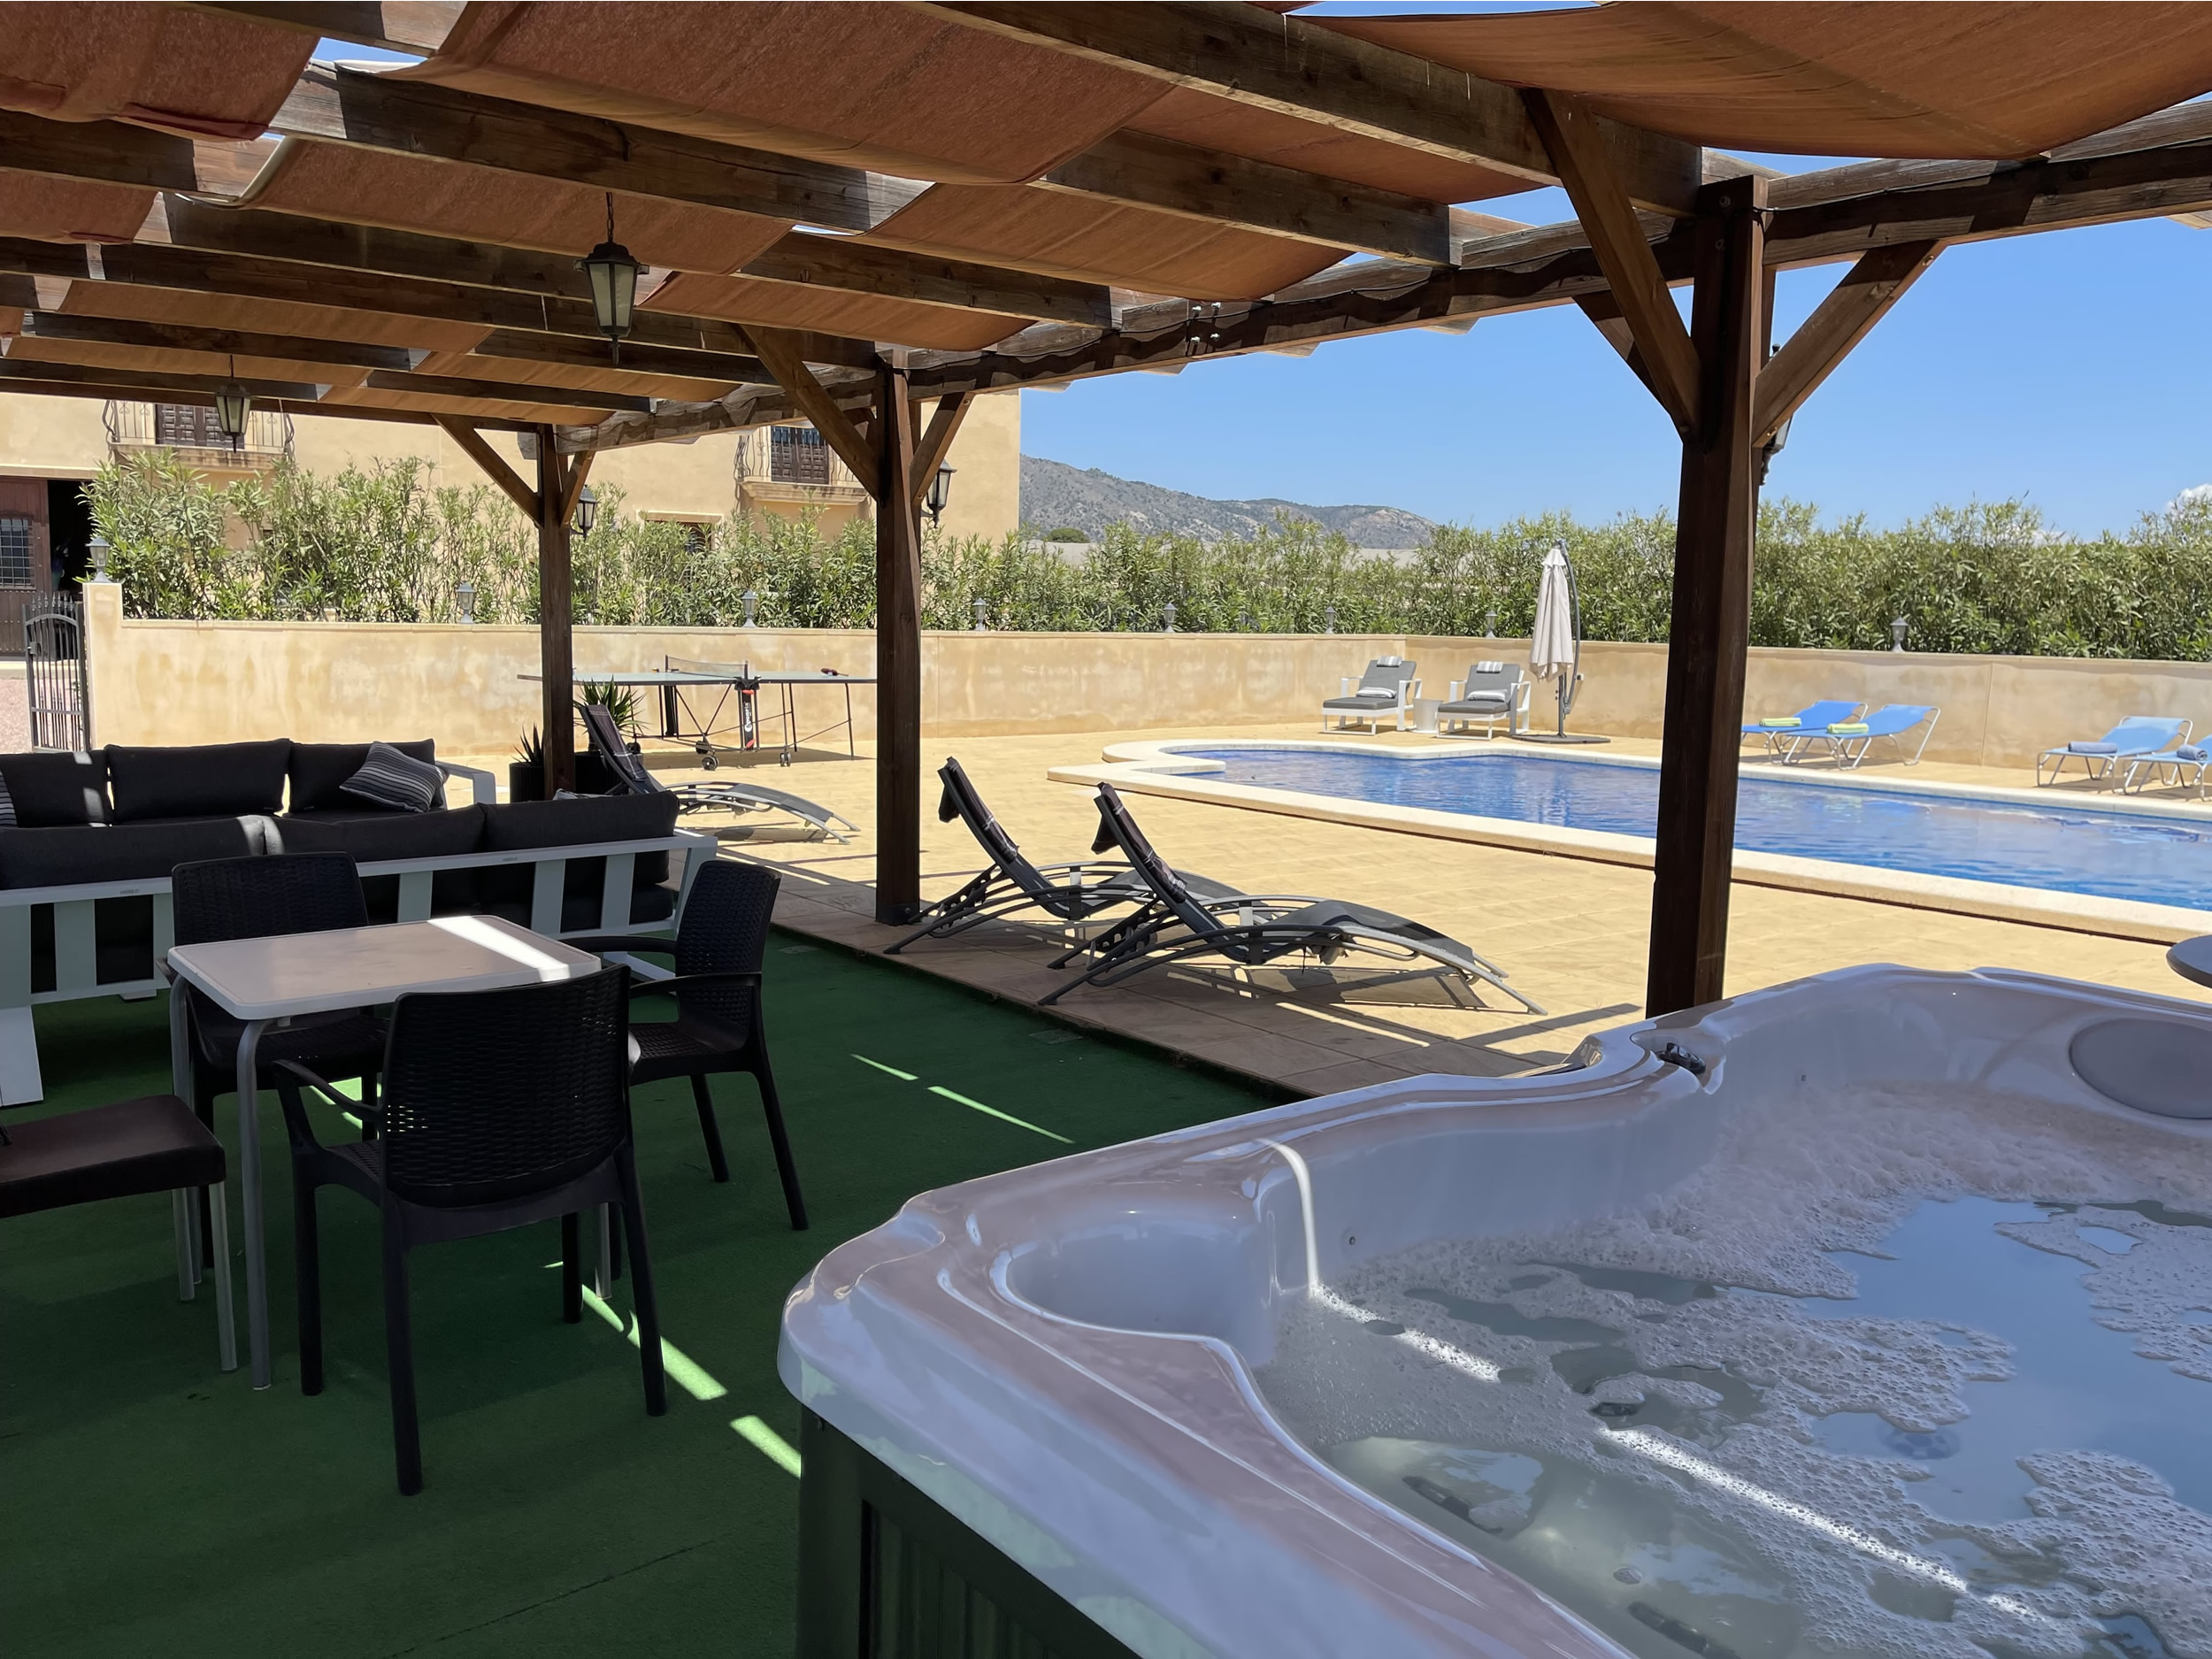 Pool area now includes Jacuzzi Hot Tub available all year!